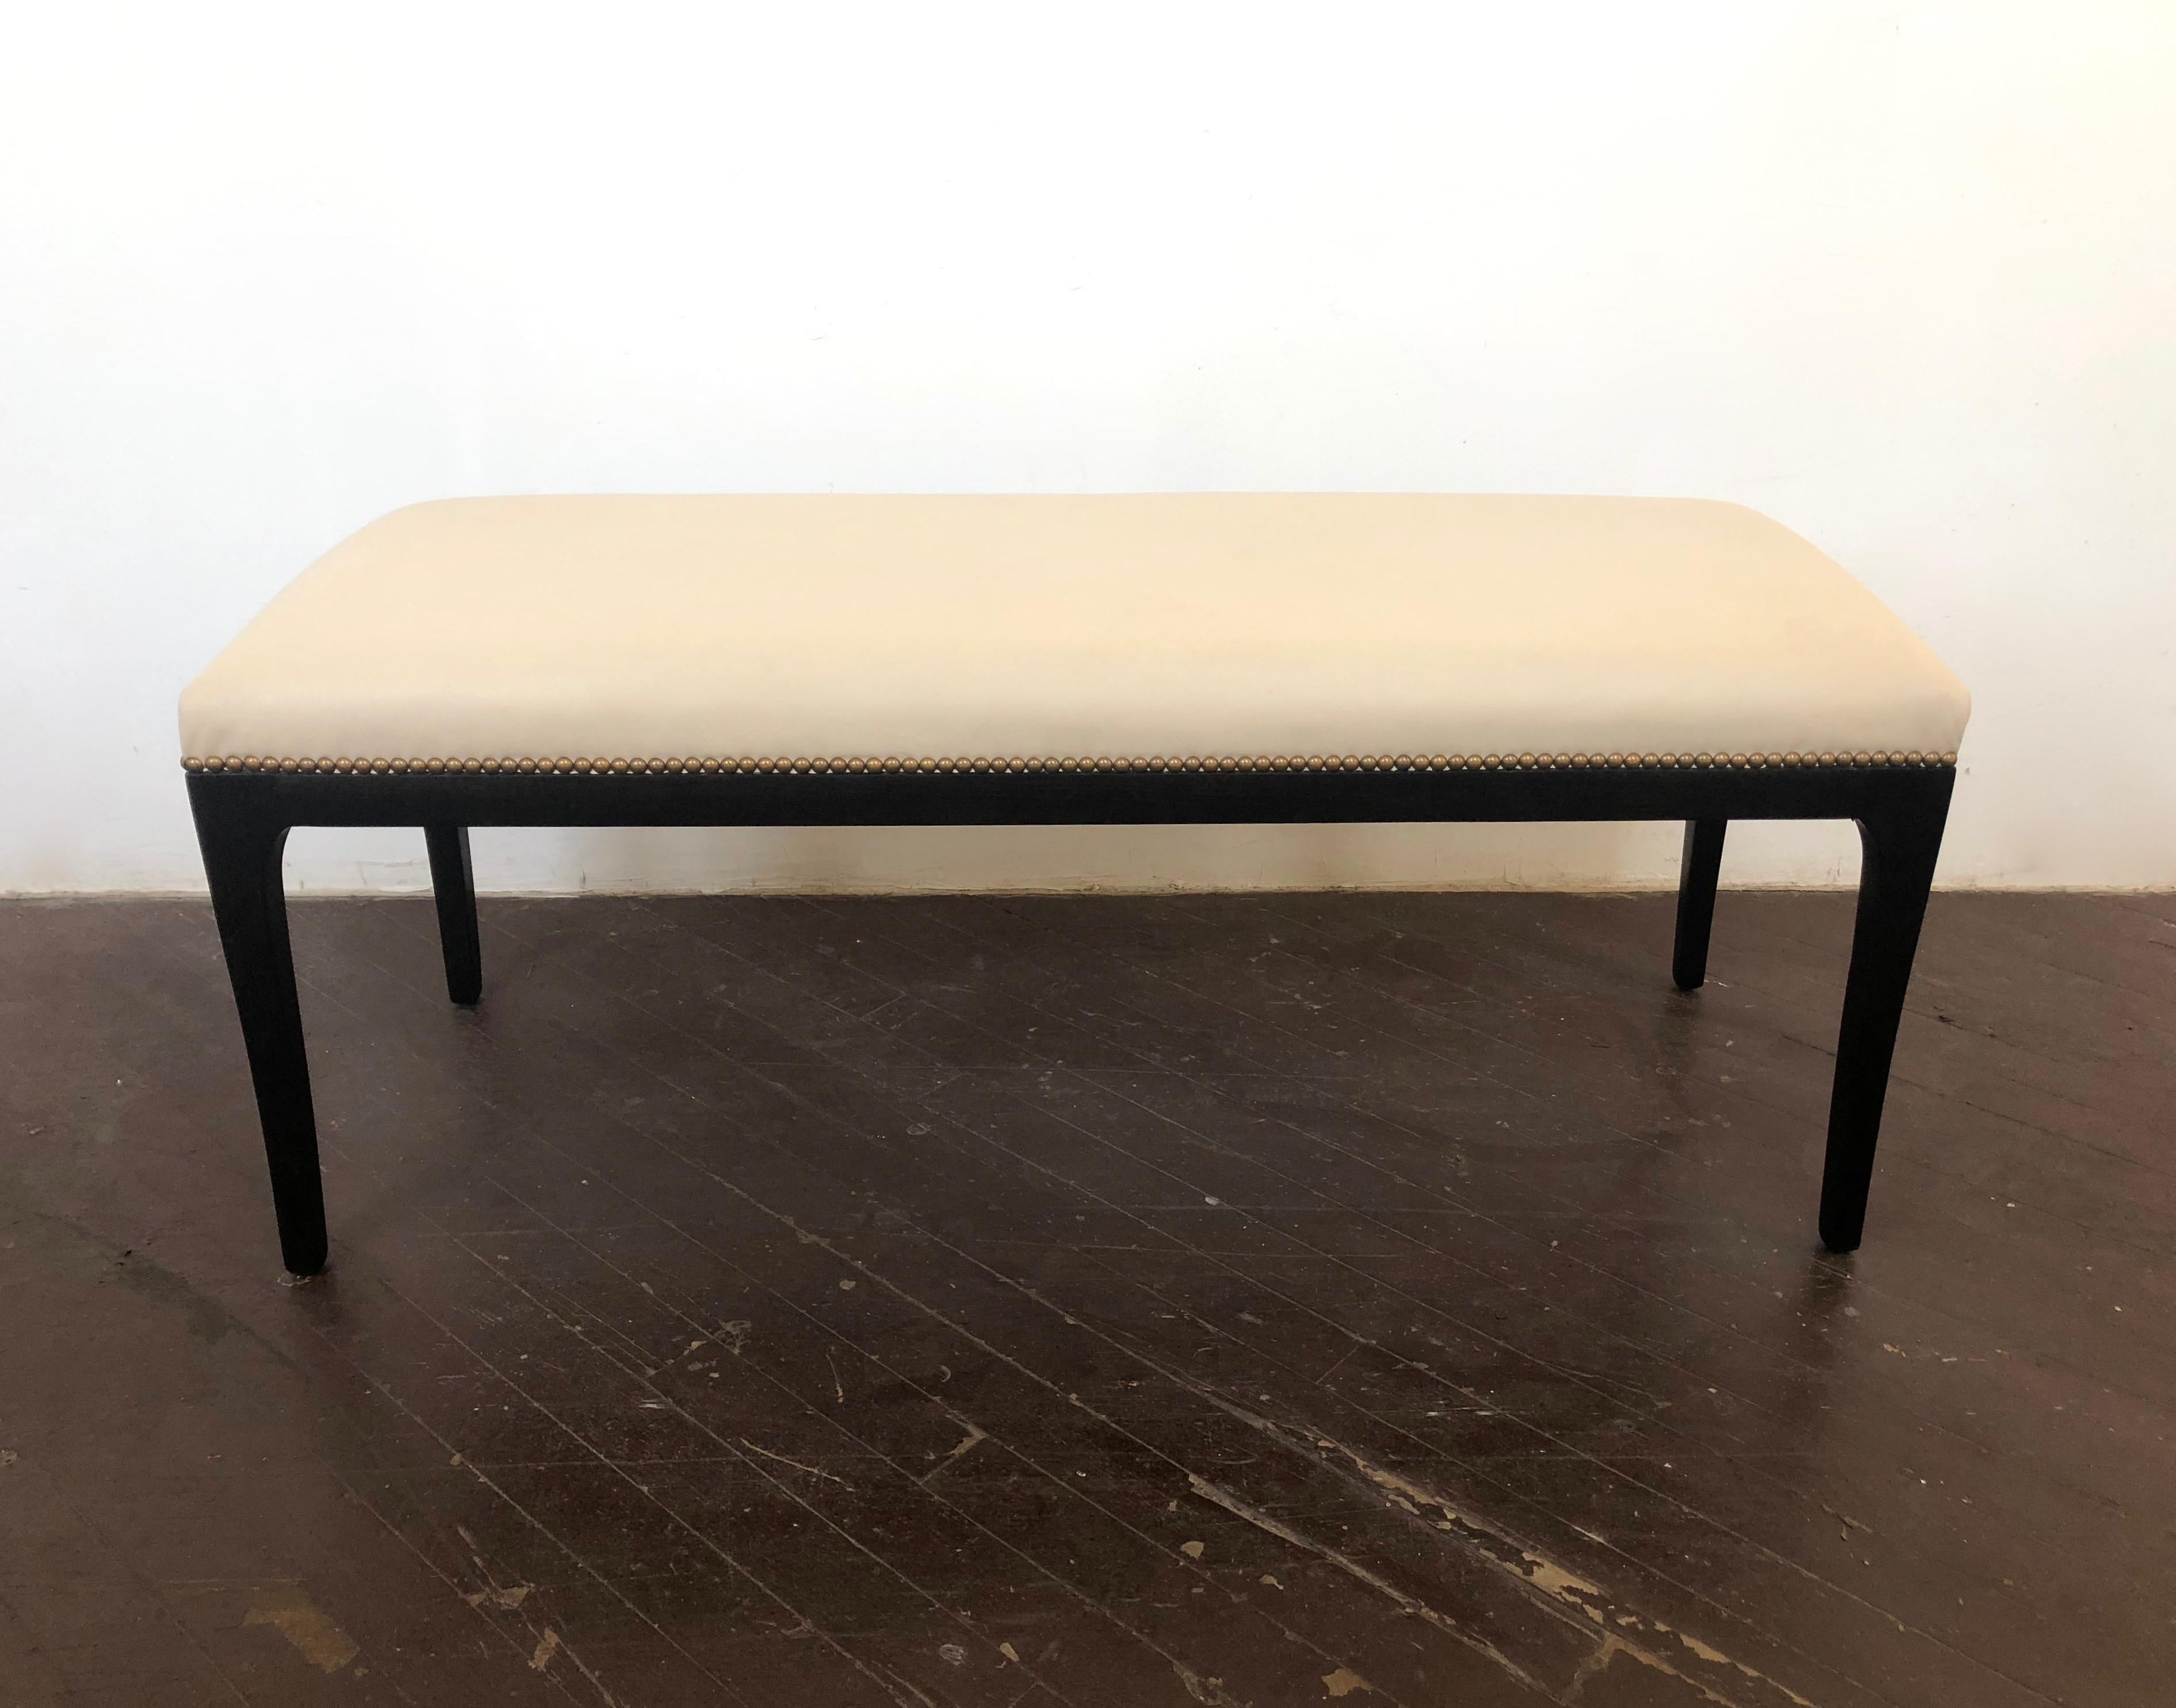 1950s restored wooden framed bench with rounded corners and four slightly tapered legs that support a spring backed seat cushion that has been reupholstered in cream colored leather and brass nailheads along the border.